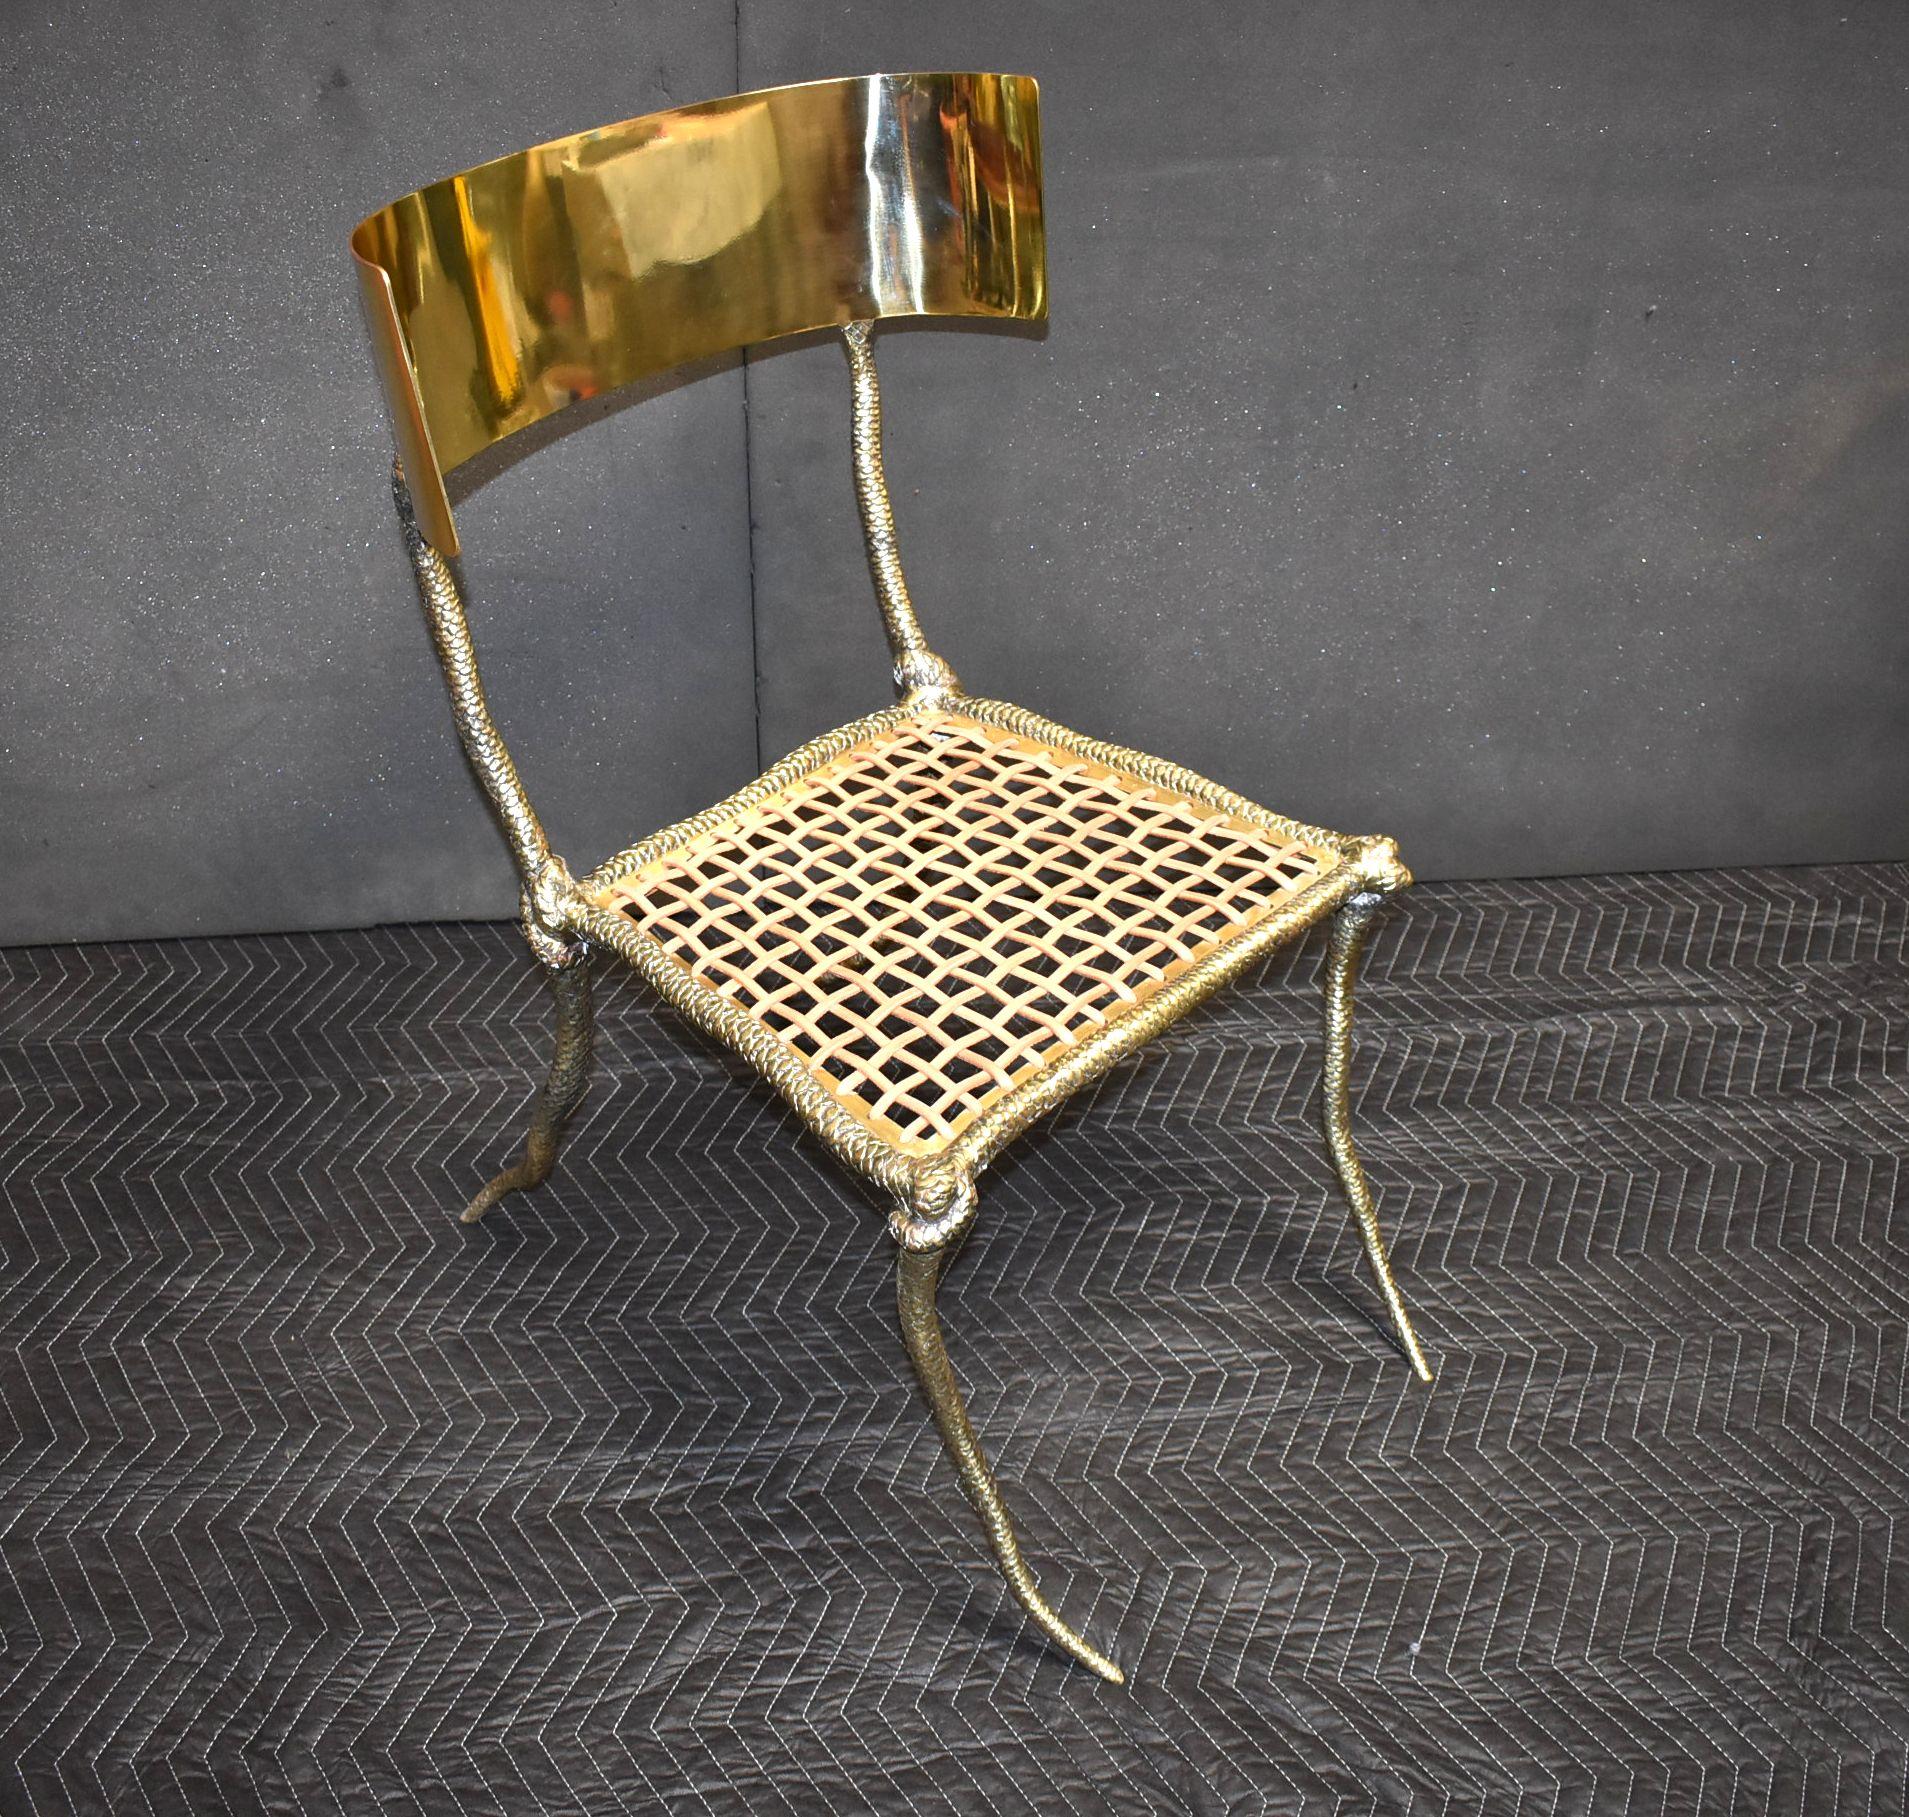 Solid brass sculptural side chair with leather strapping and curve back. 

Additional dimensions:
Width of curve back 21.50 inches
Width front seat 21 inches
Width back seat 18 inches
Depth from front to back legs 28.50 inches
Height seat